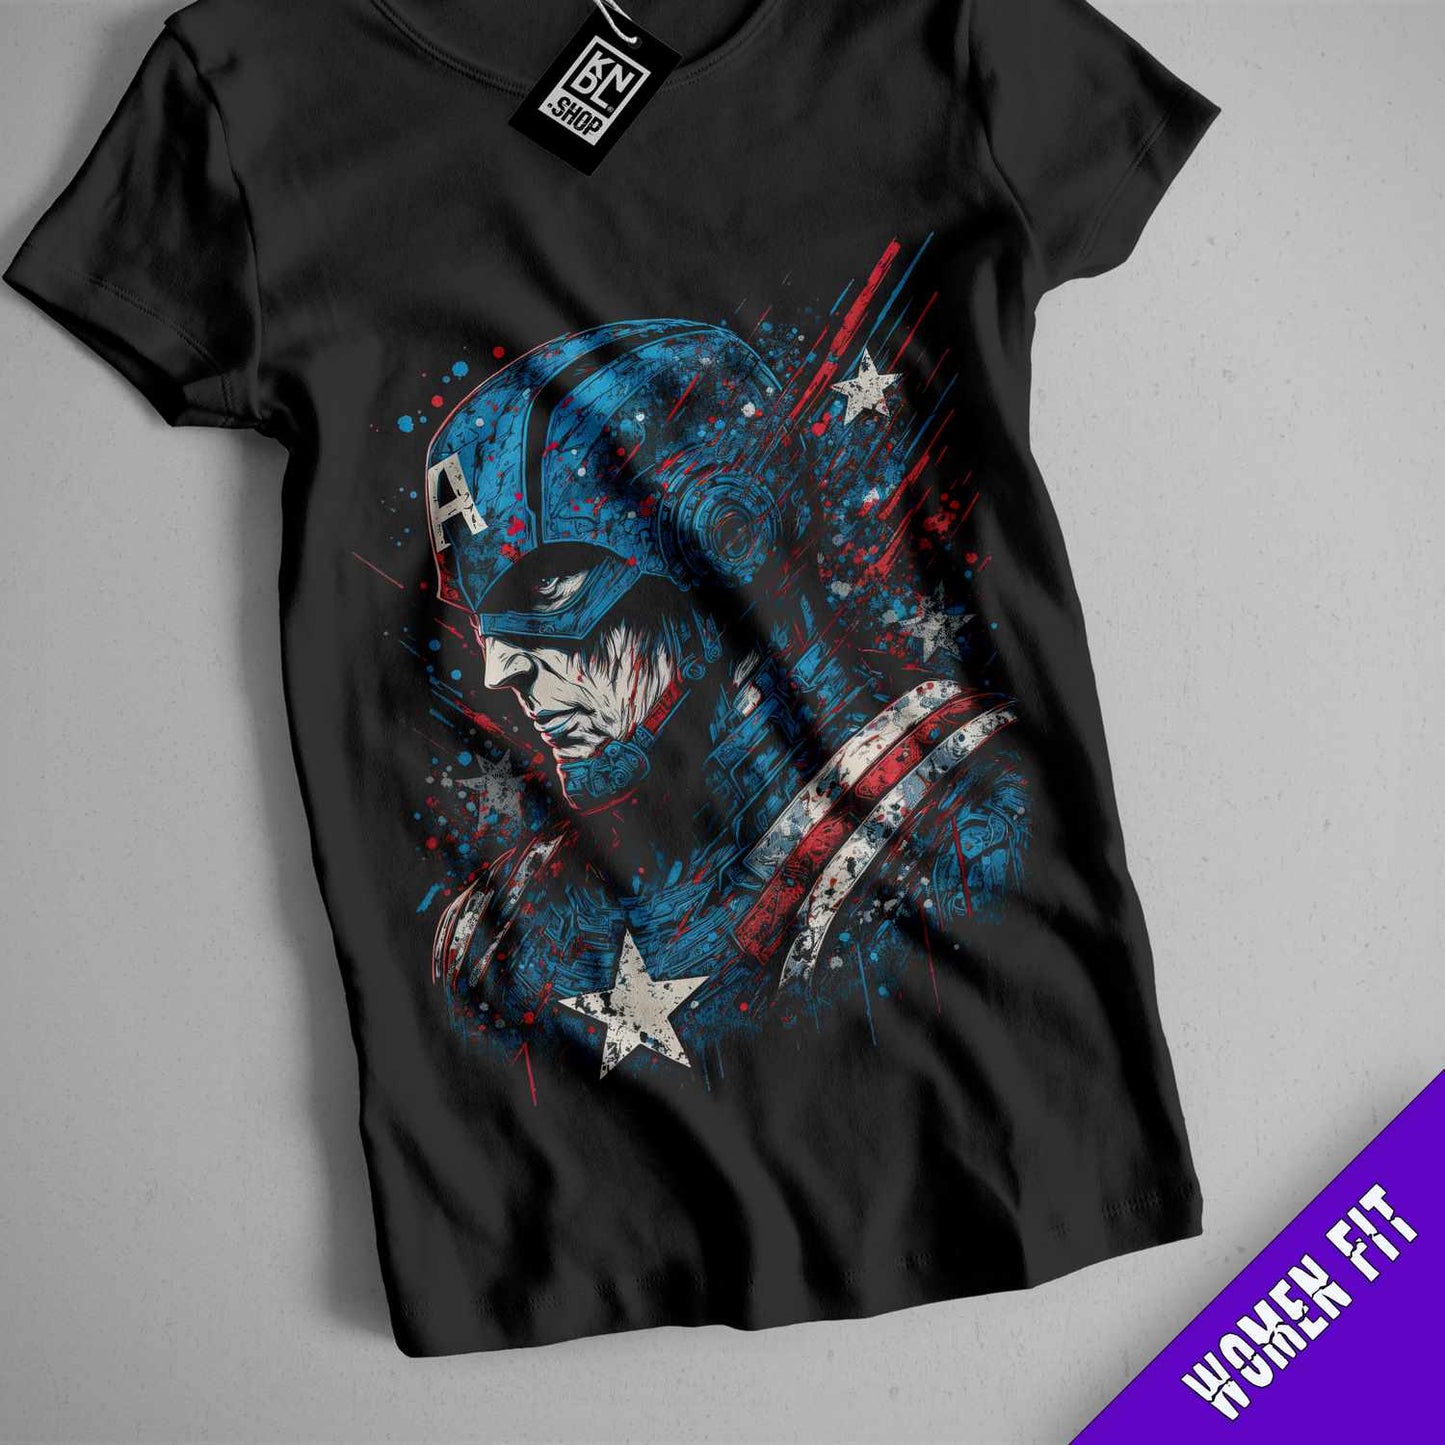 a black shirt with a captain america graphic on it